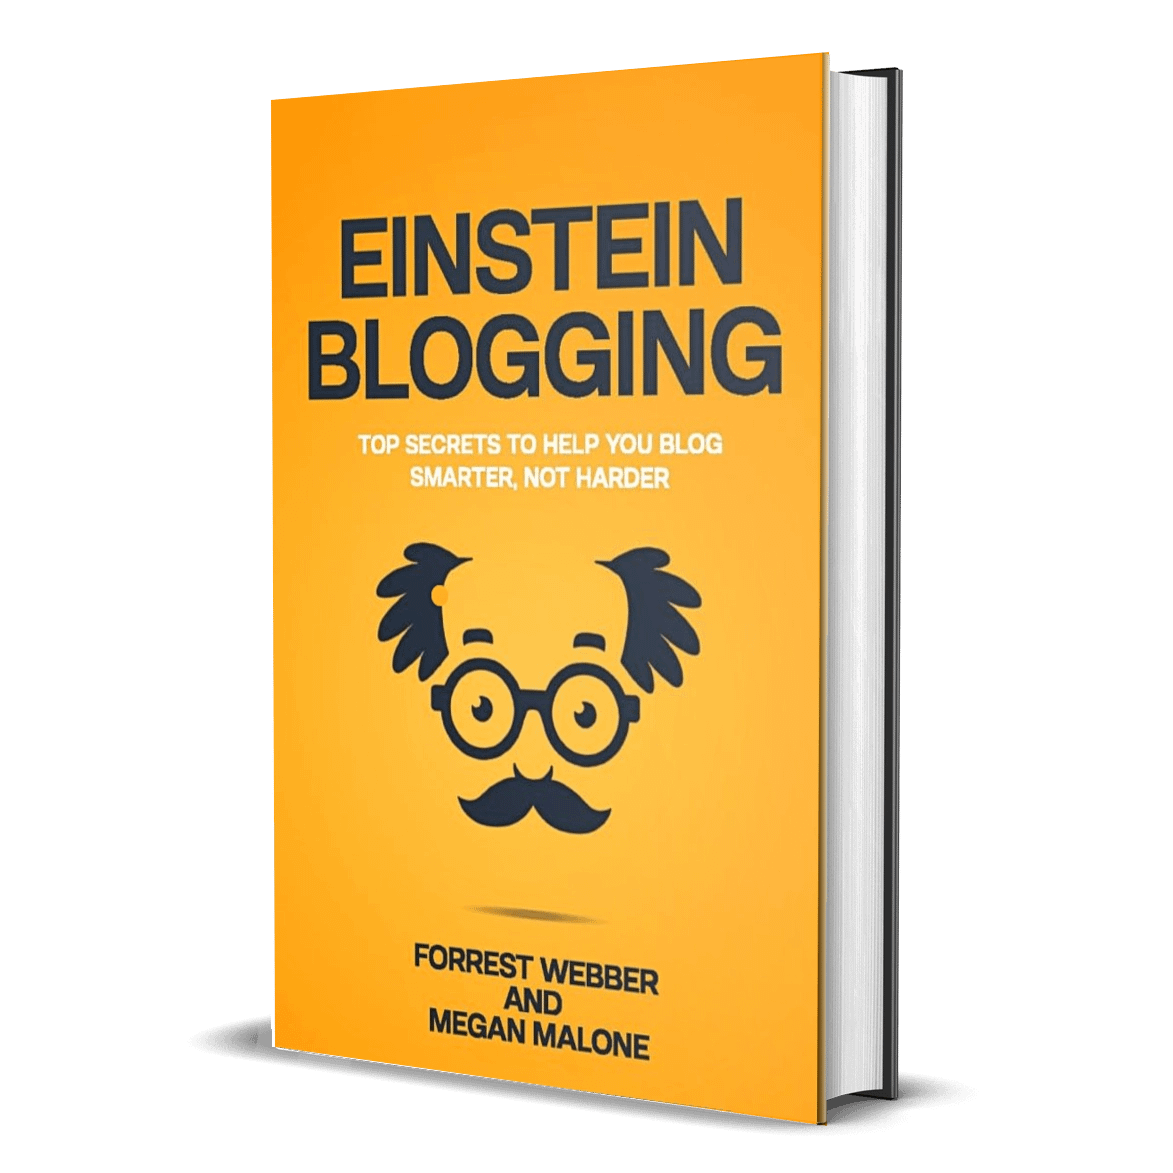 Einstein Blogging by Forrest Webber and Megan Malone is required reading for anyone who wants to transition their blog from a one-person show to a real blogging business.